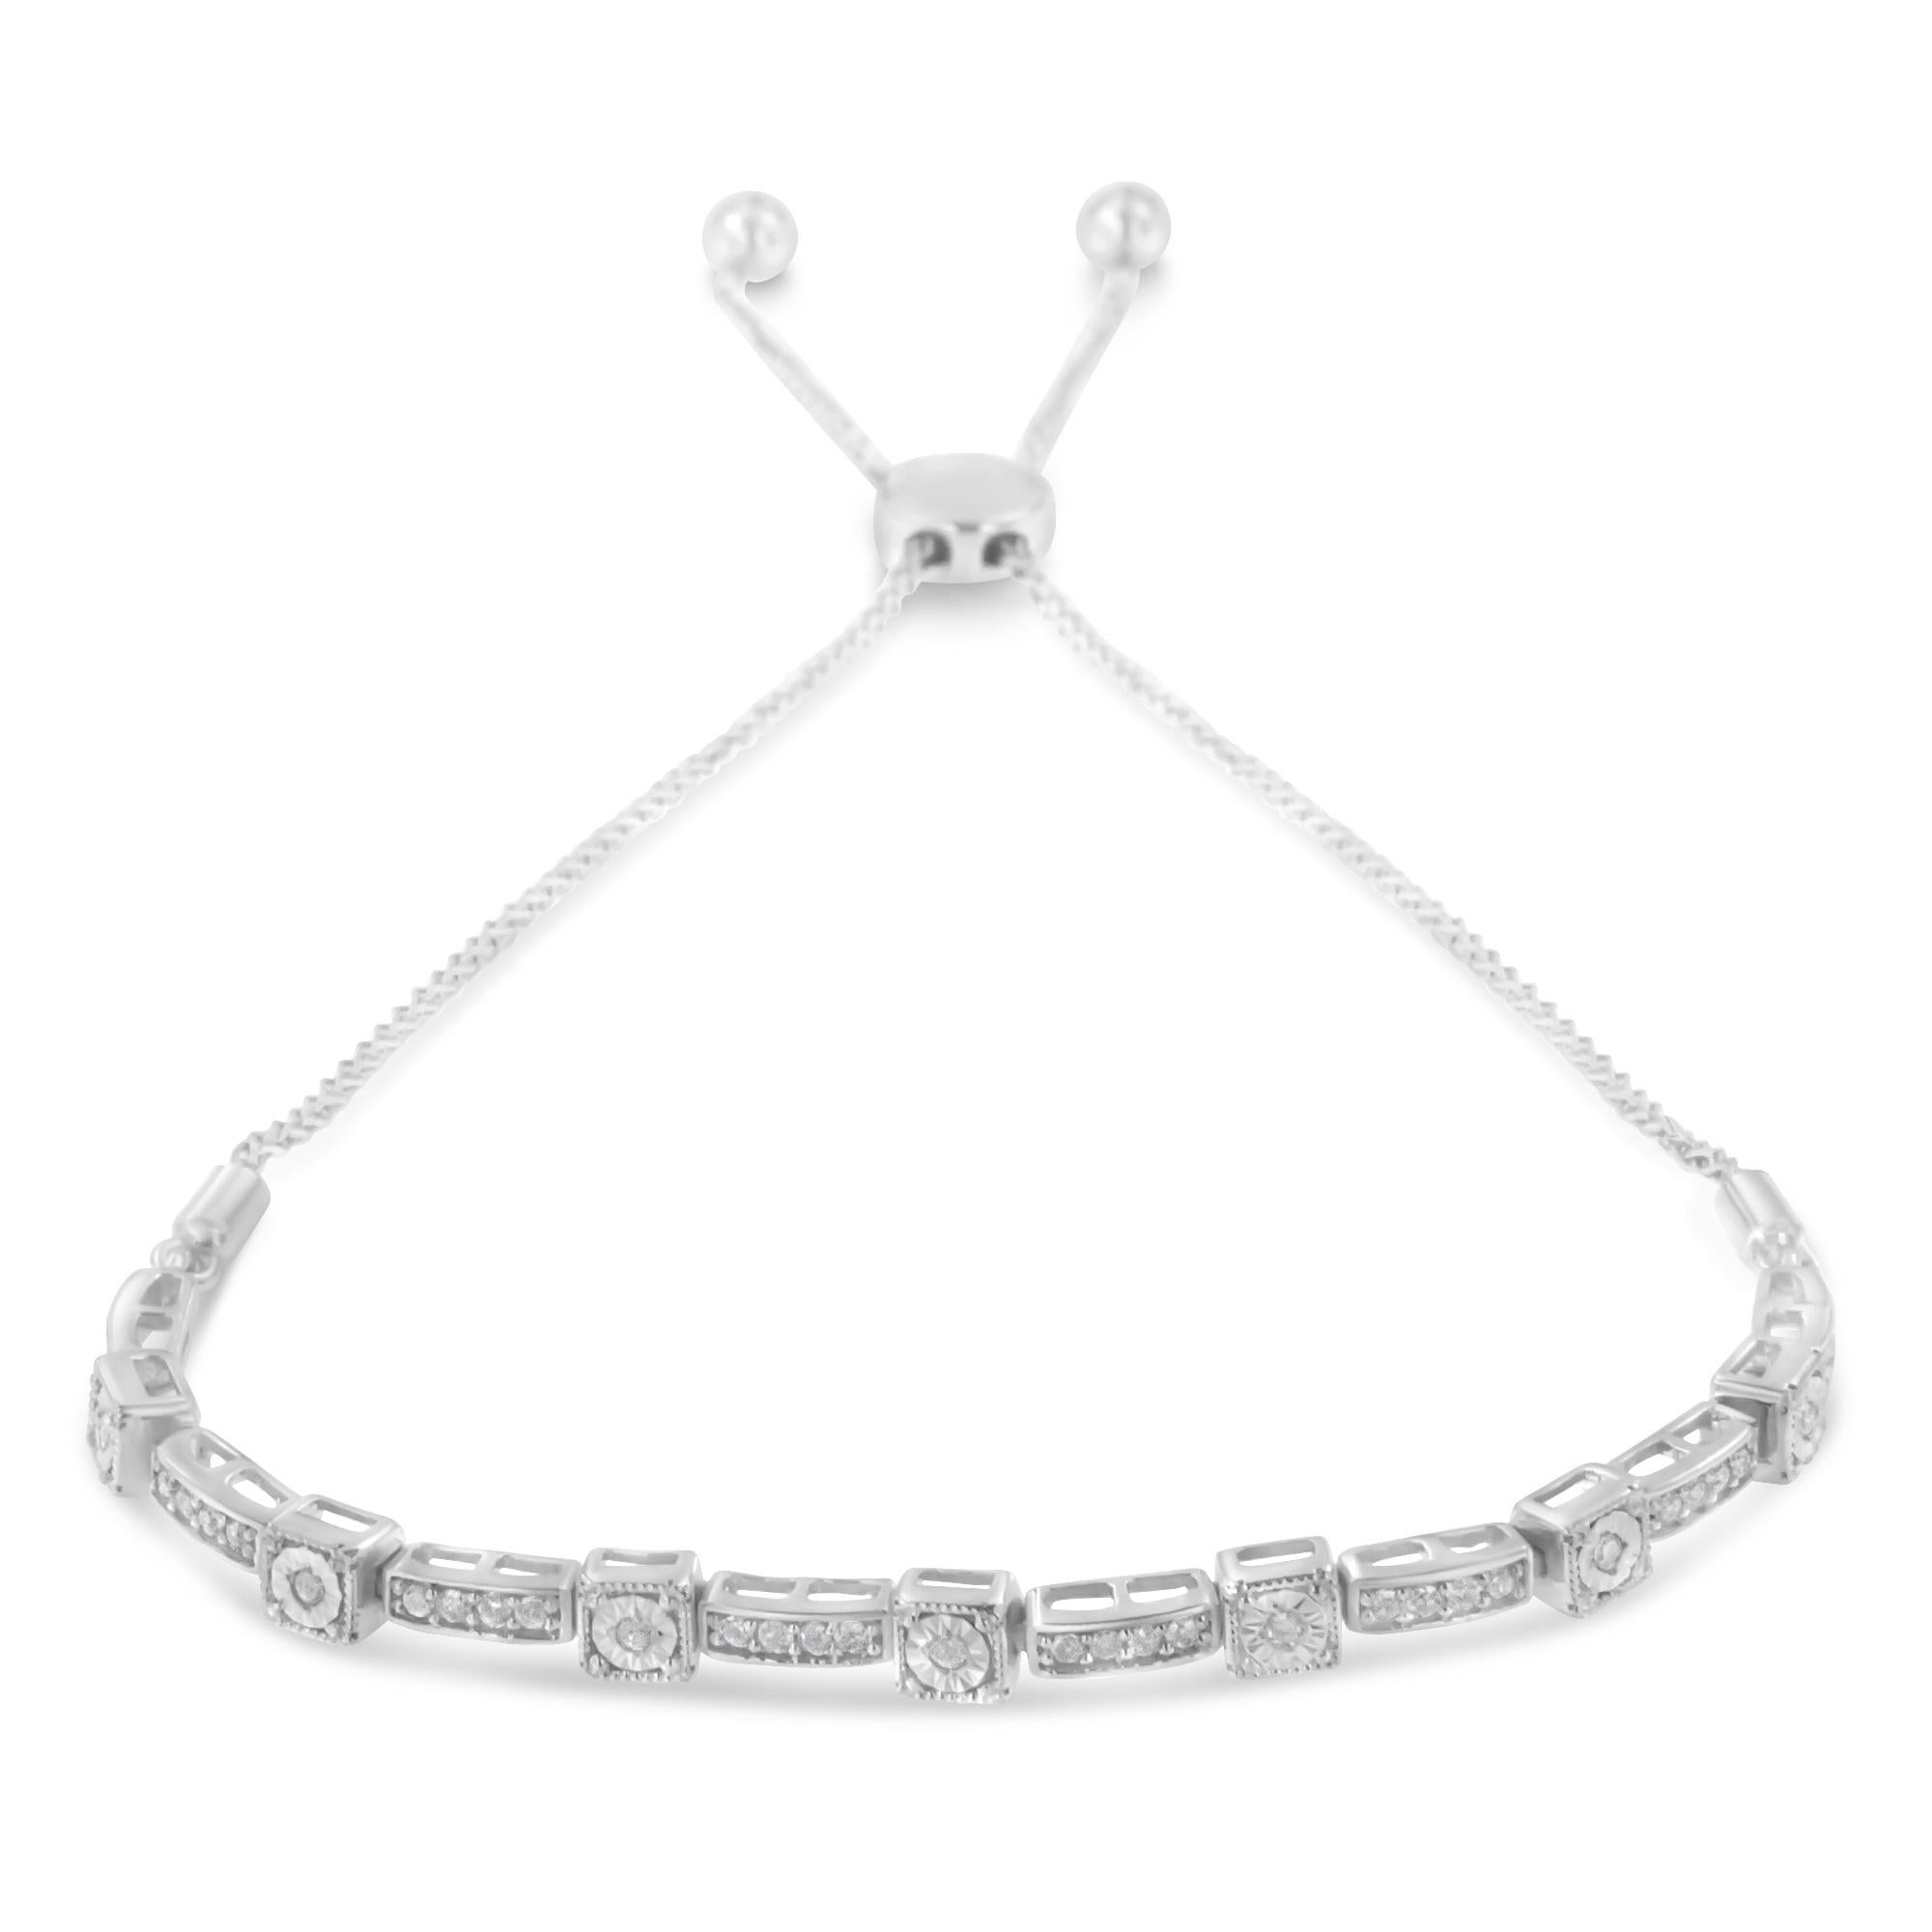 Express your affection to her with this dazzling bolo bracelet. Uniquely designed, it is composed of sleek sterling silver, which is finely polished with grace. The bracelet features round, and rectangular accents that are adorned with flickering